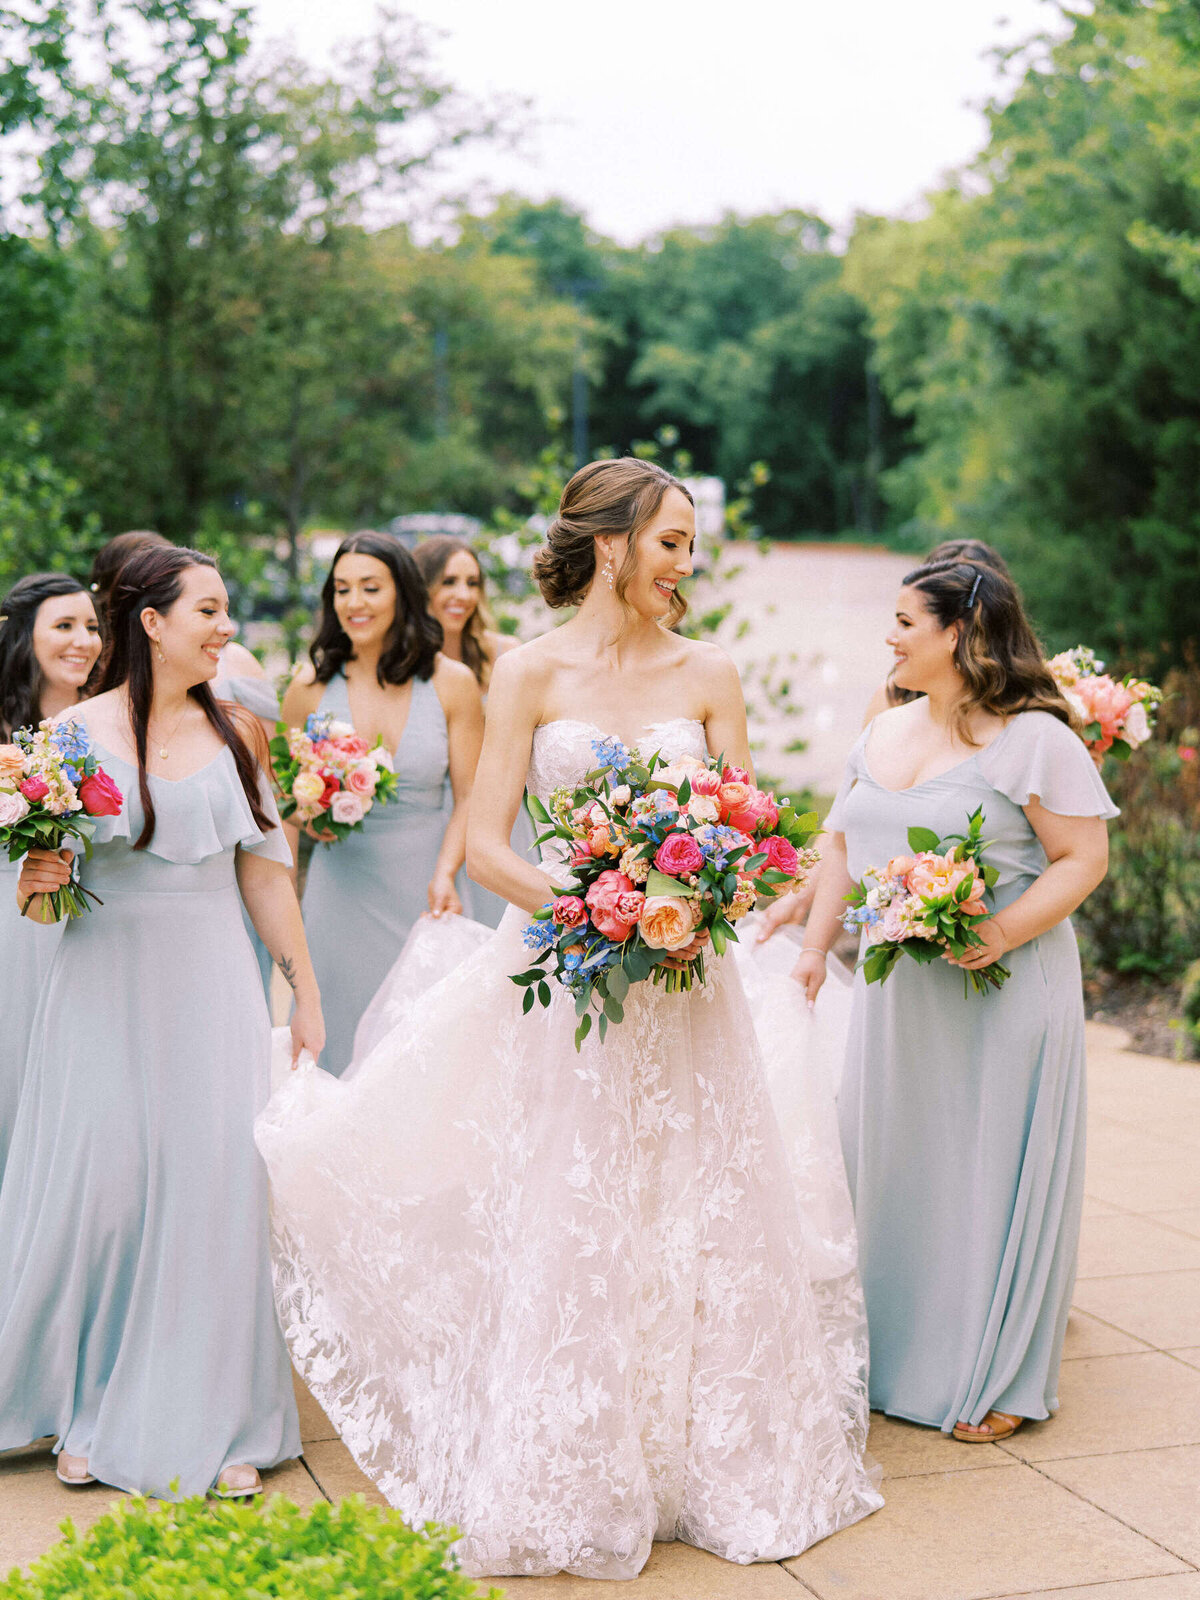 Bridal party in aqua dresses walk with bride wearing Monique Lhuillier gown and hold colorful bouquets